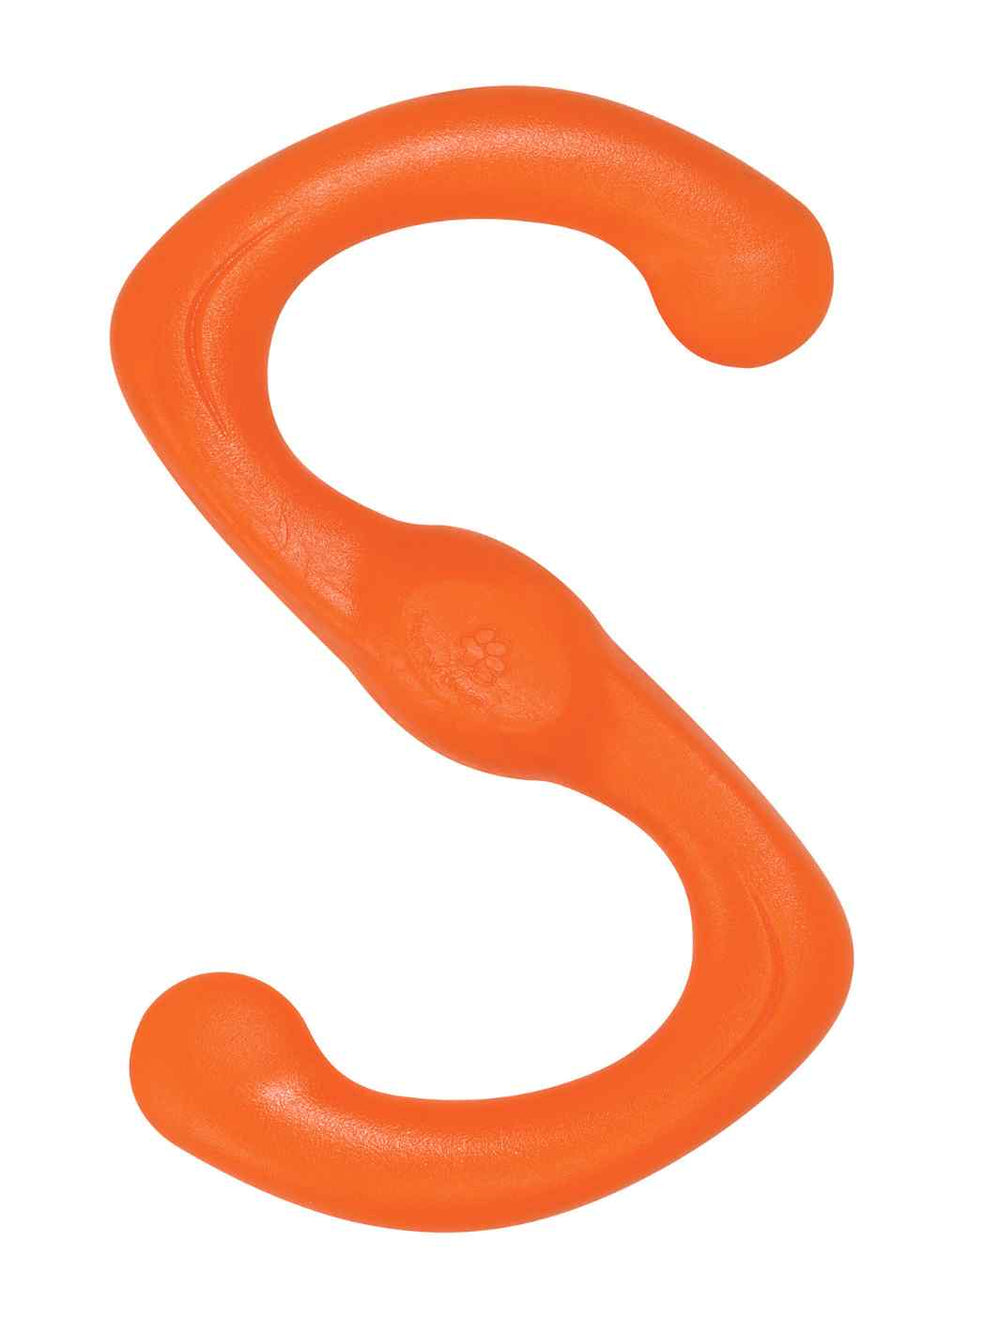 West Paw Bumi Tug Chew and Float Dog Toy in Orange